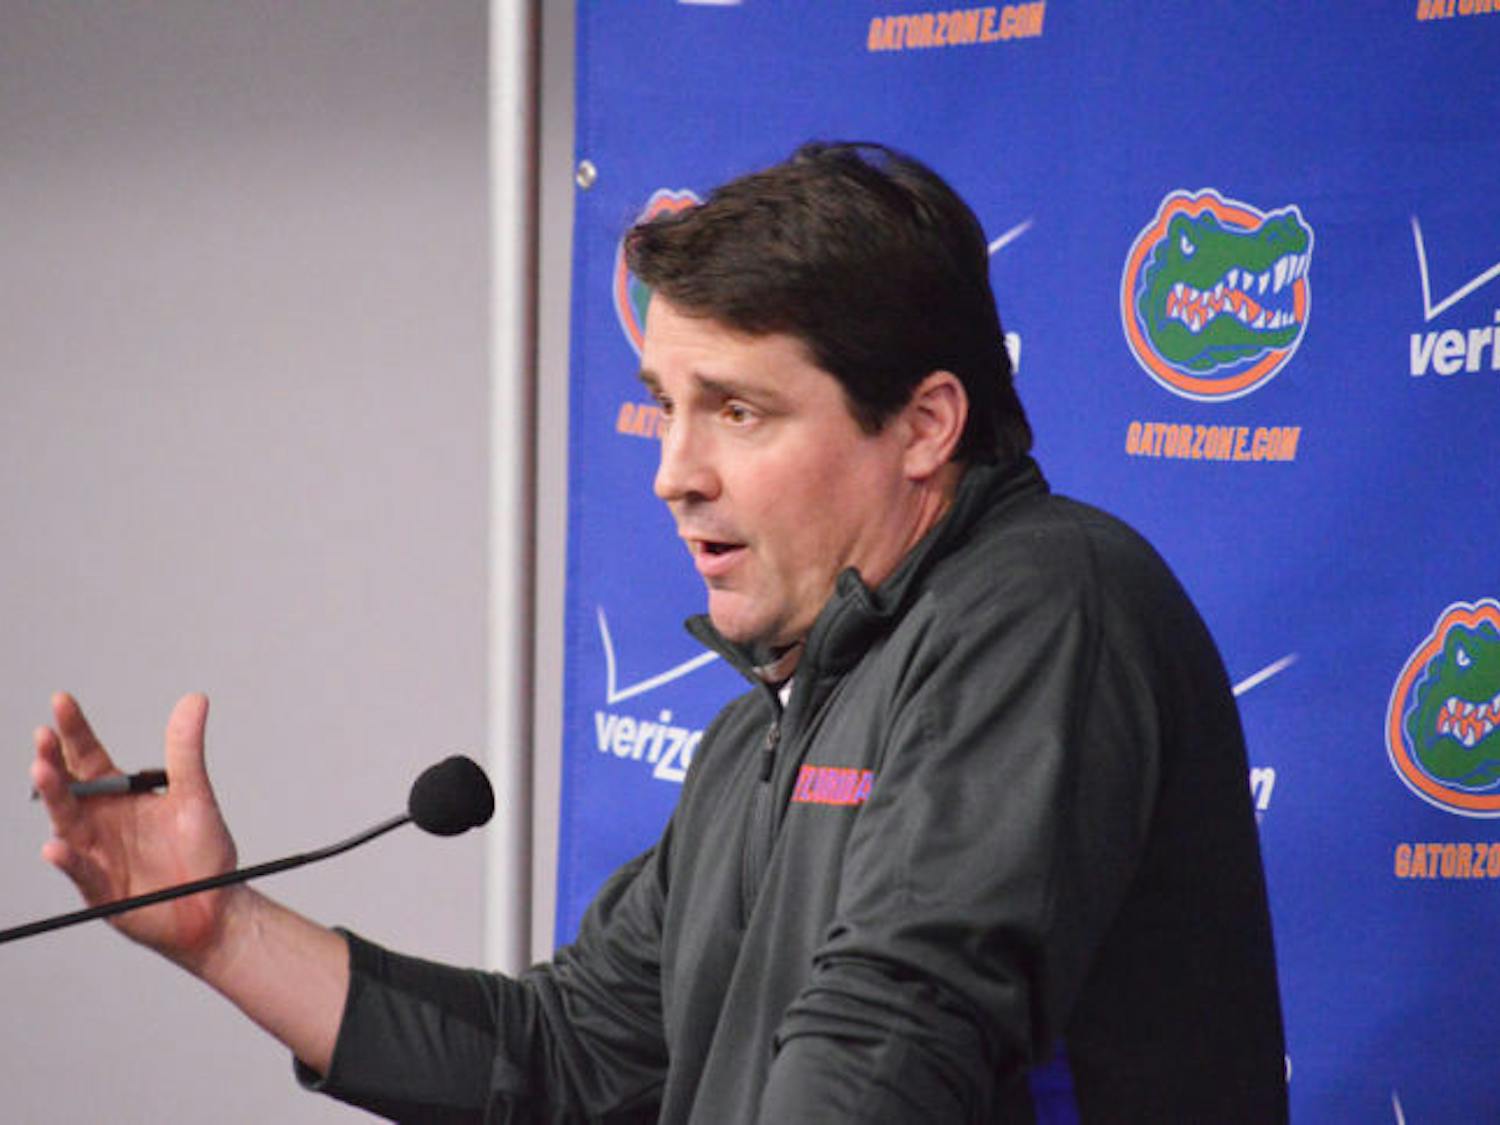 Will Muschamp speaks at a press conference in Ben Hill Griffin Stadium on Jan. 13. UF hosted Friday Night Lights on Friday for its top prospects.
&nbsp;